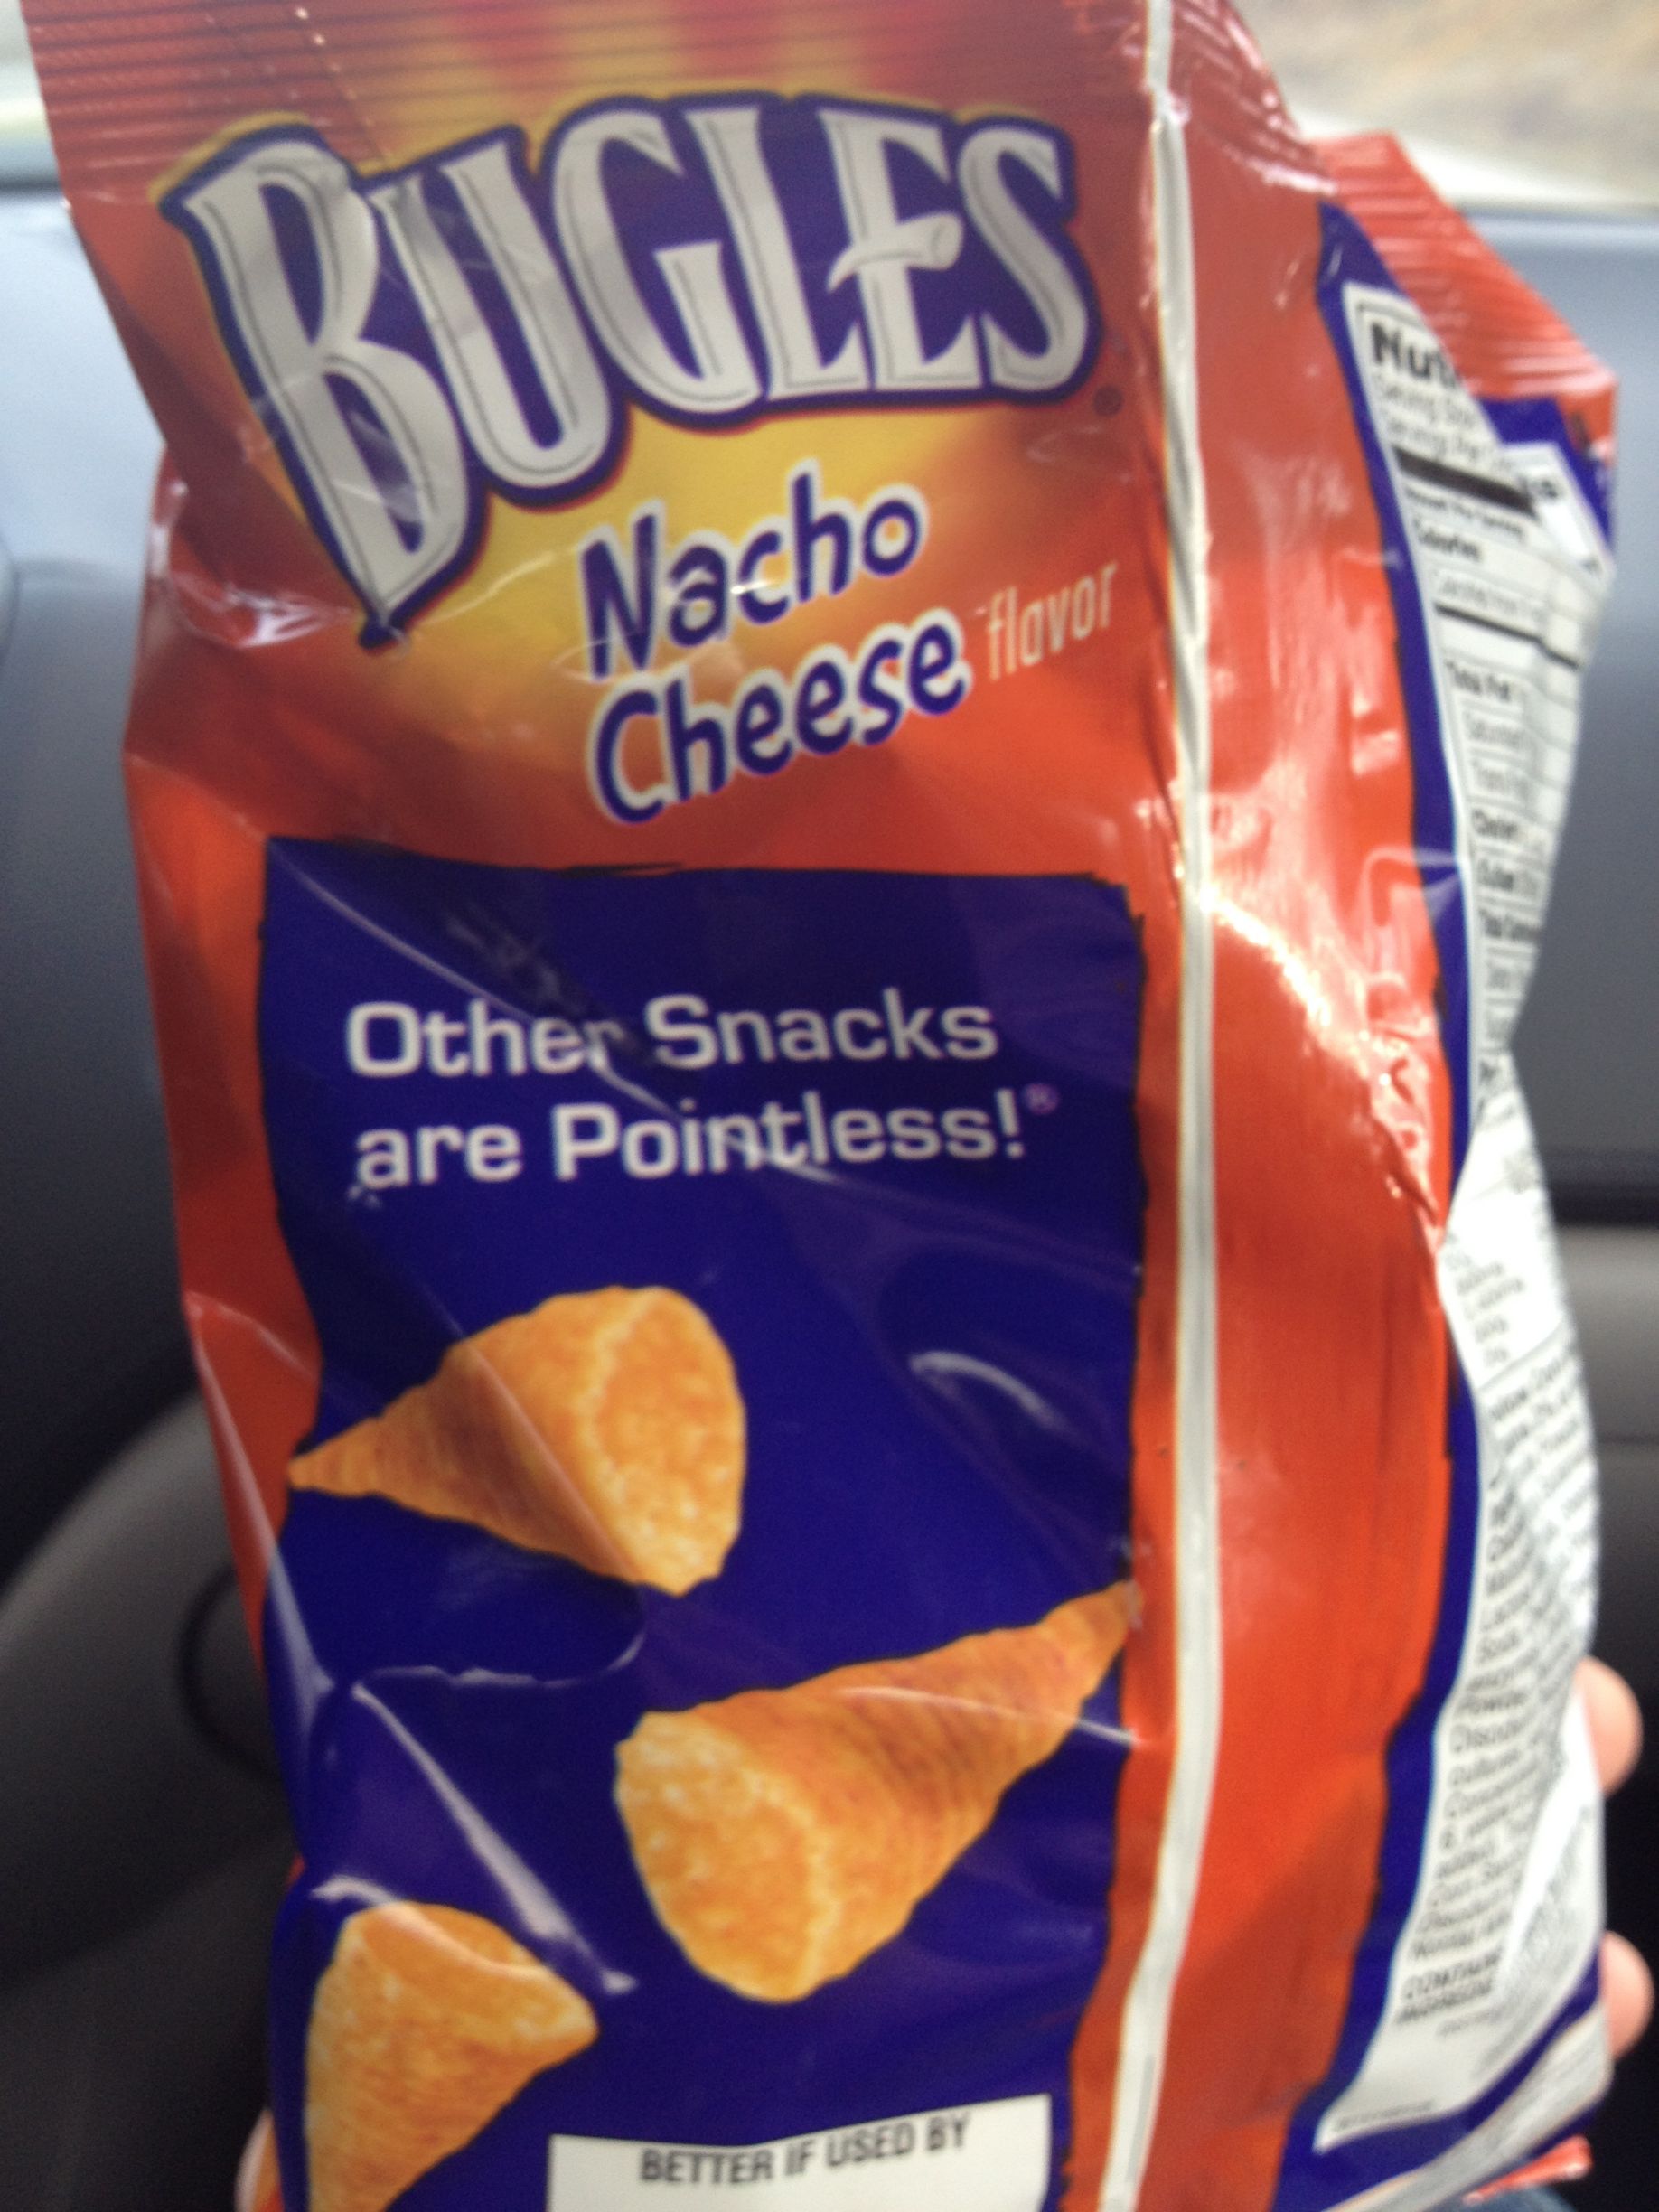 snack puns - Nacho Cheese flava Other Snacks are Pointless!